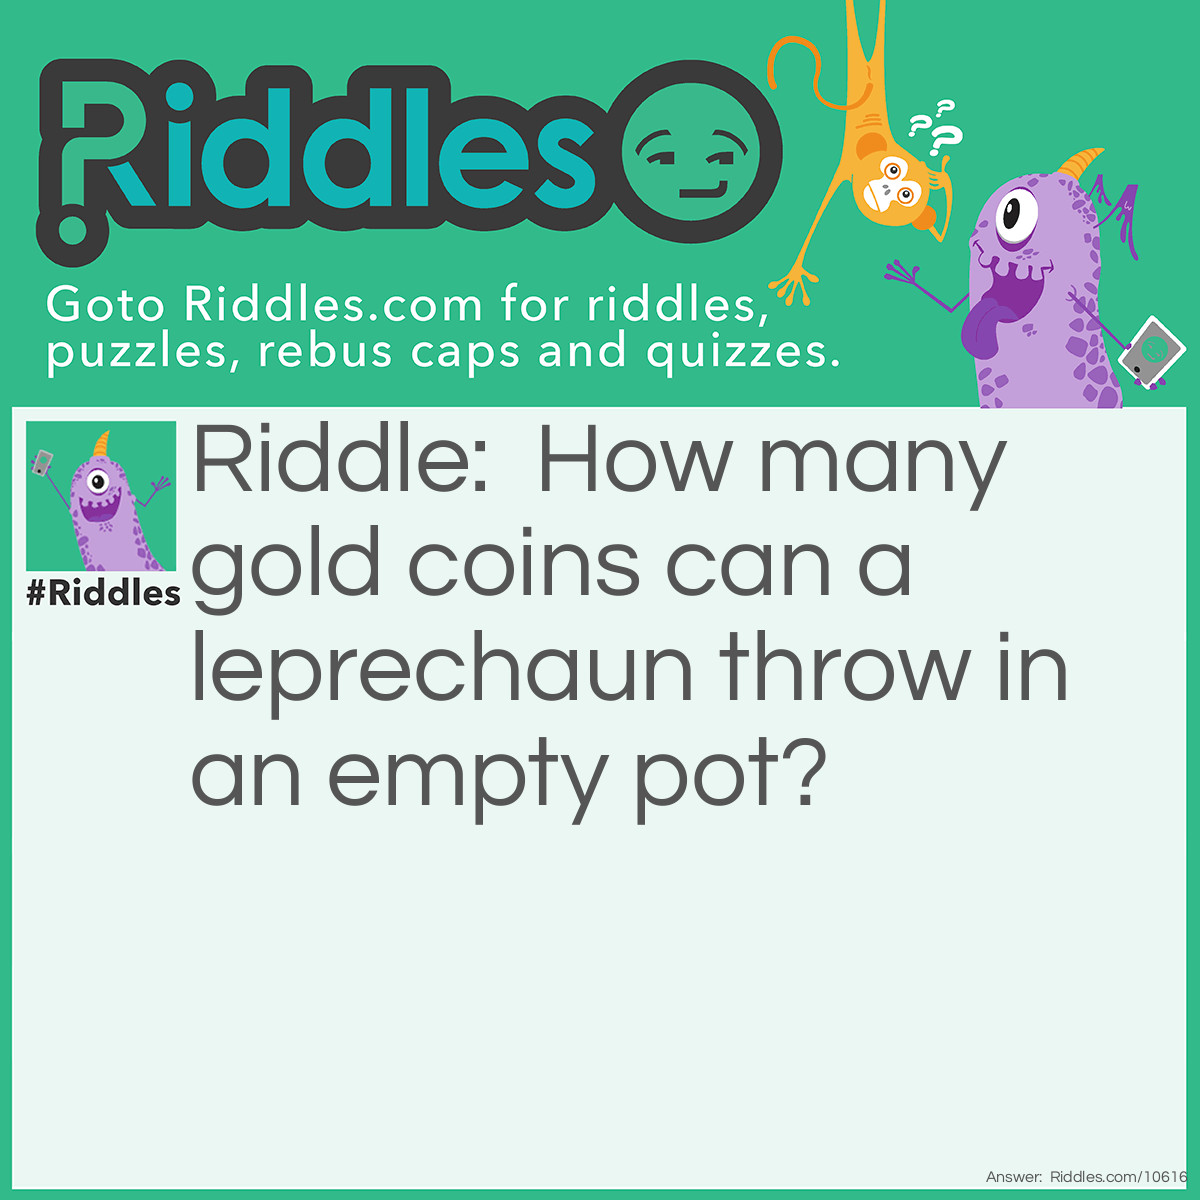 Riddle: How many gold coins can a leprechaun throw in an empty pot? Answer: One. After that, it’s no longer empty.